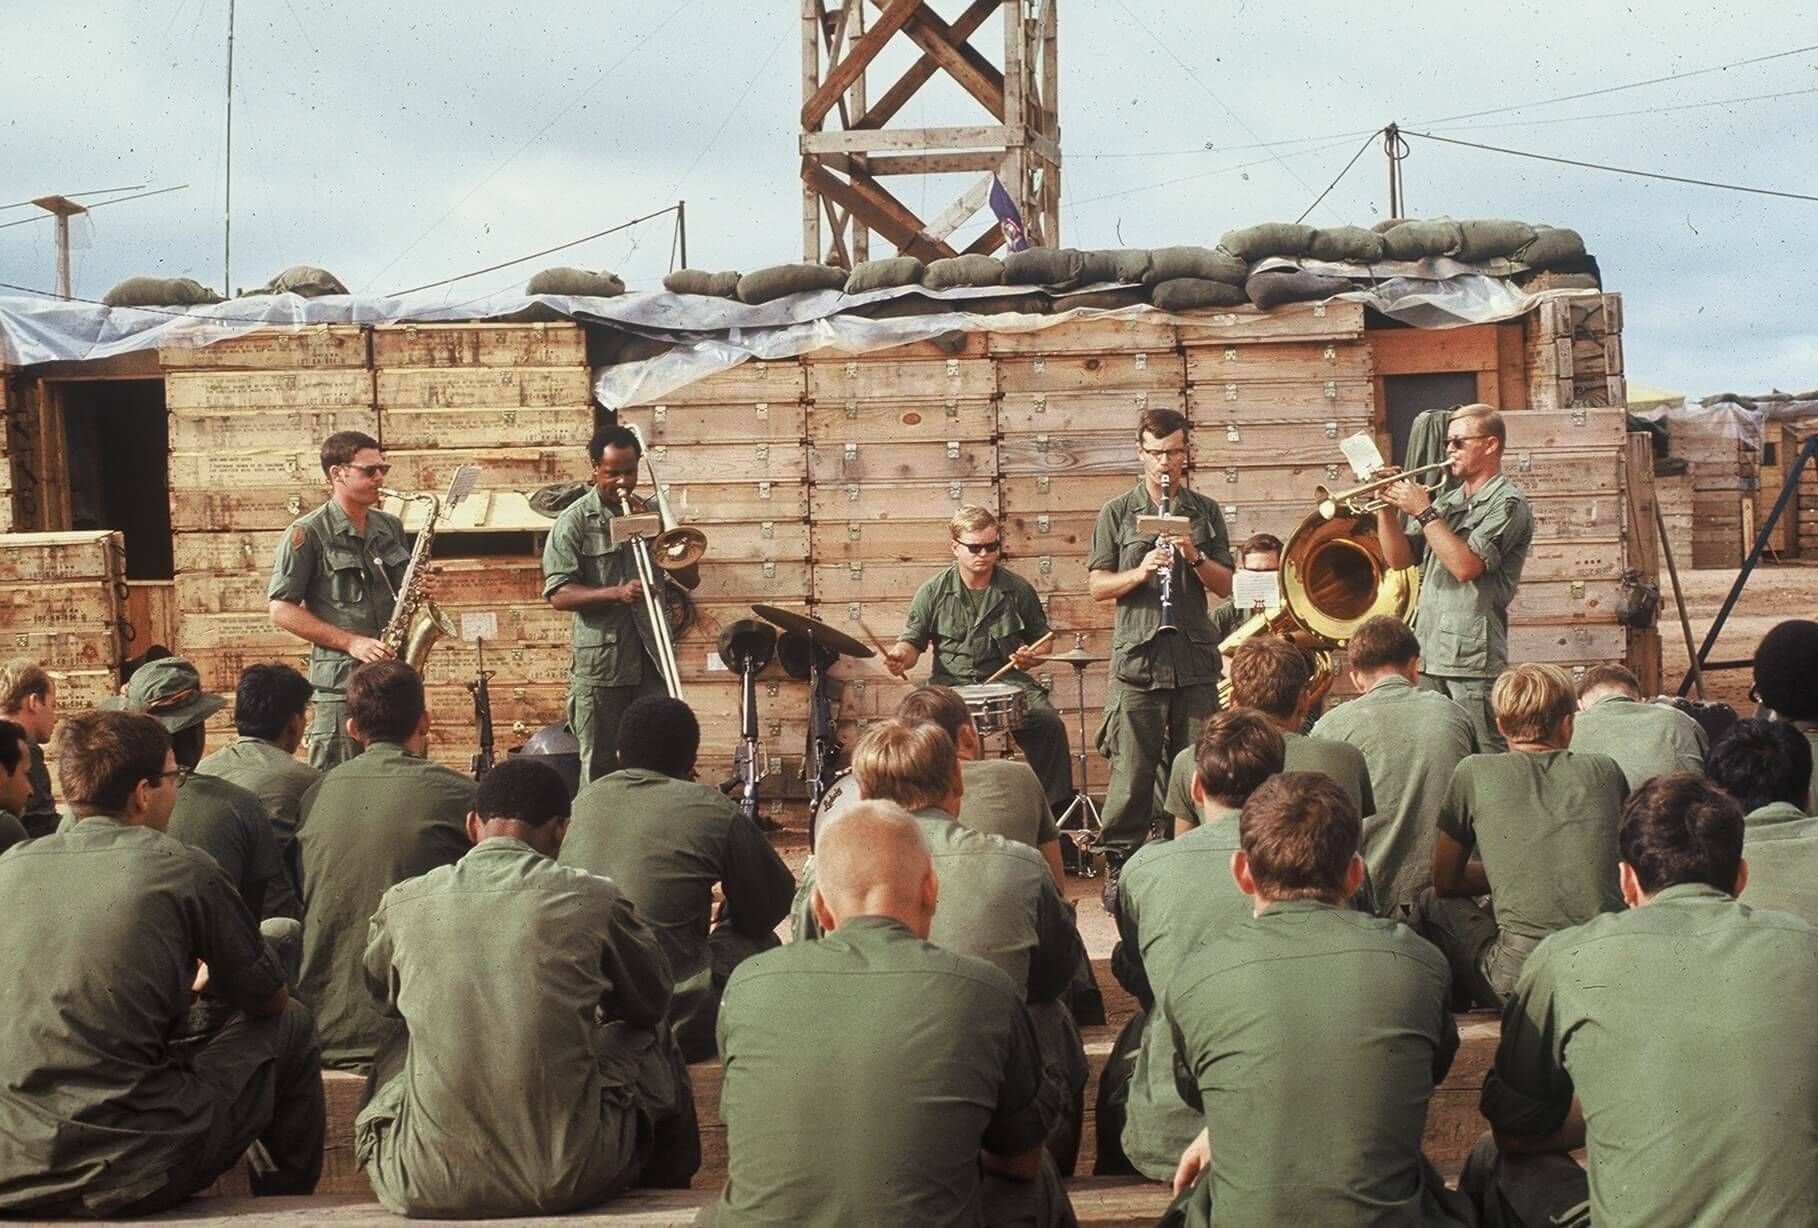 While Woodstock unfolded thousands of miles away from Vietnam, soldiers still got a taste of live music courtesy of an Army band. Photo courtesy of the author.